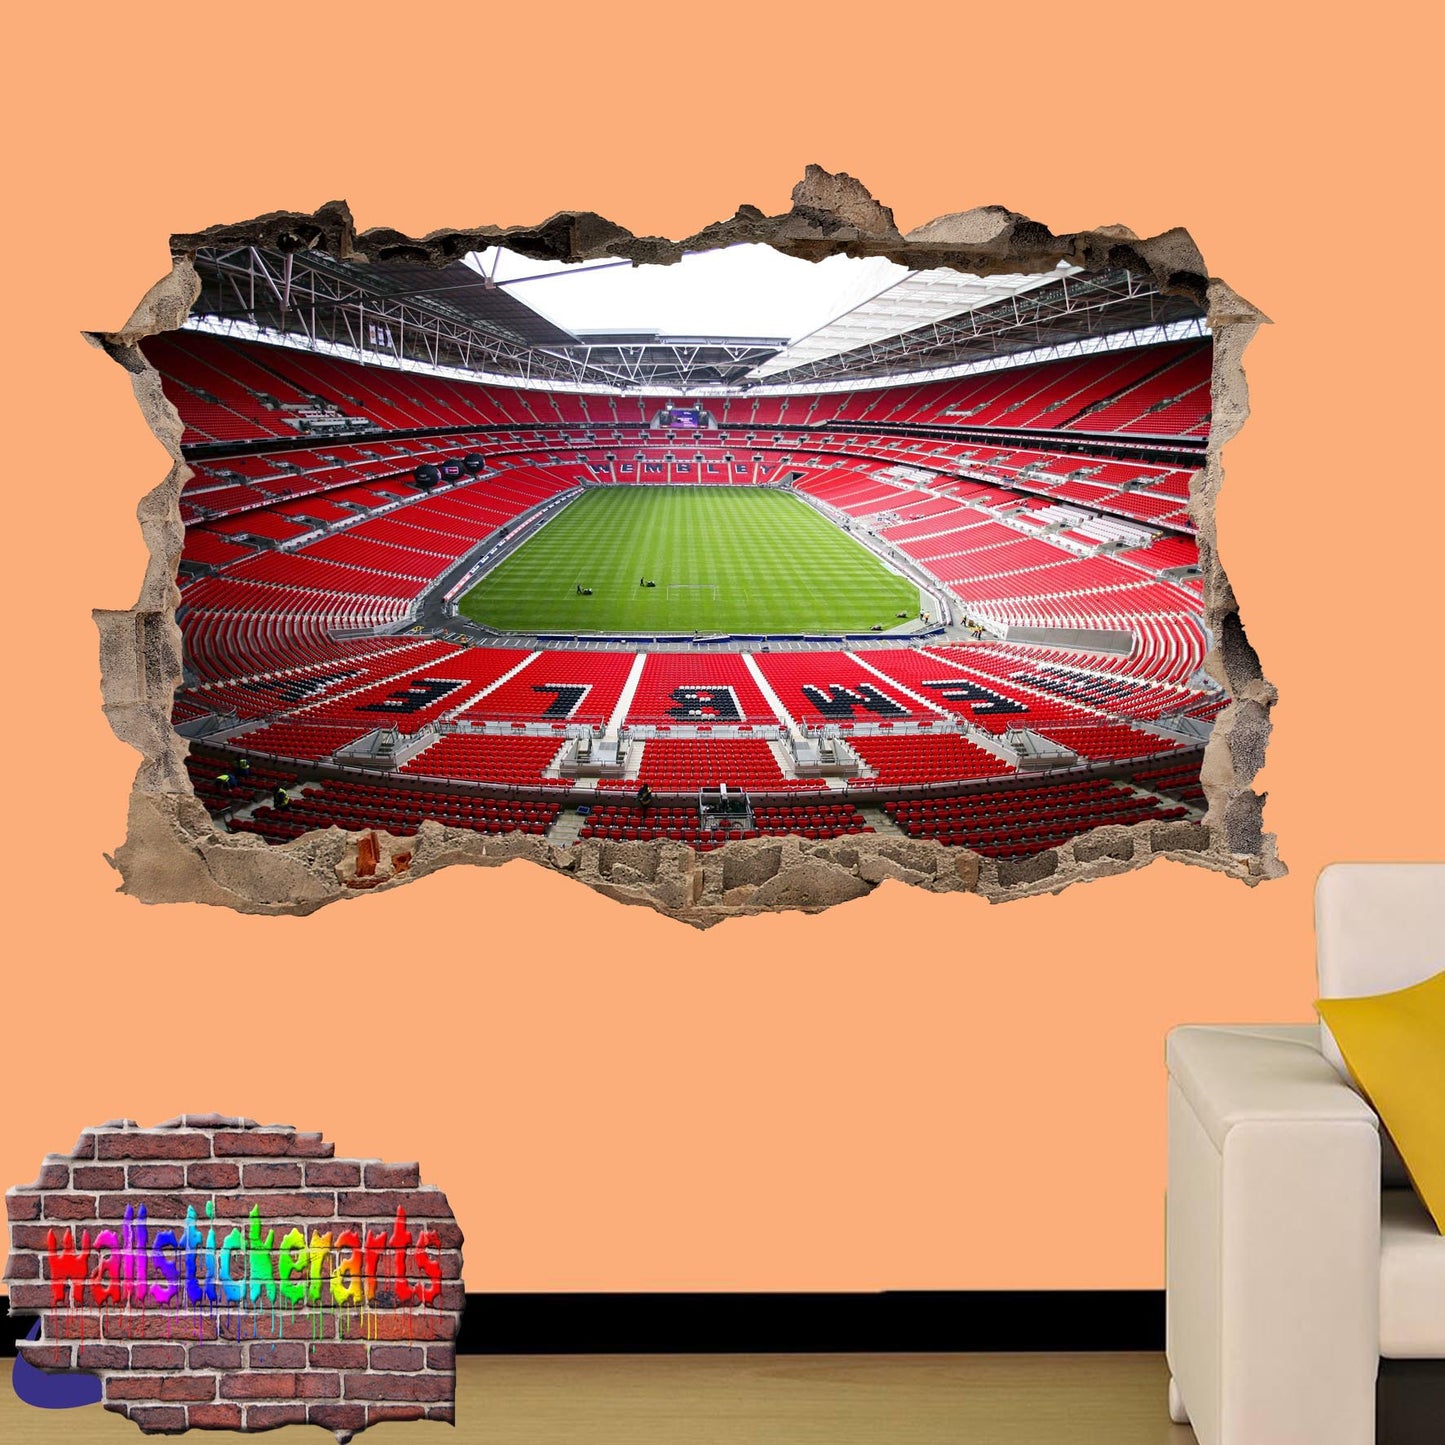 London Wembley Football Stadium 3d Smashed Wall Sticker Mural Room Office Shop Decor Decal ZO8